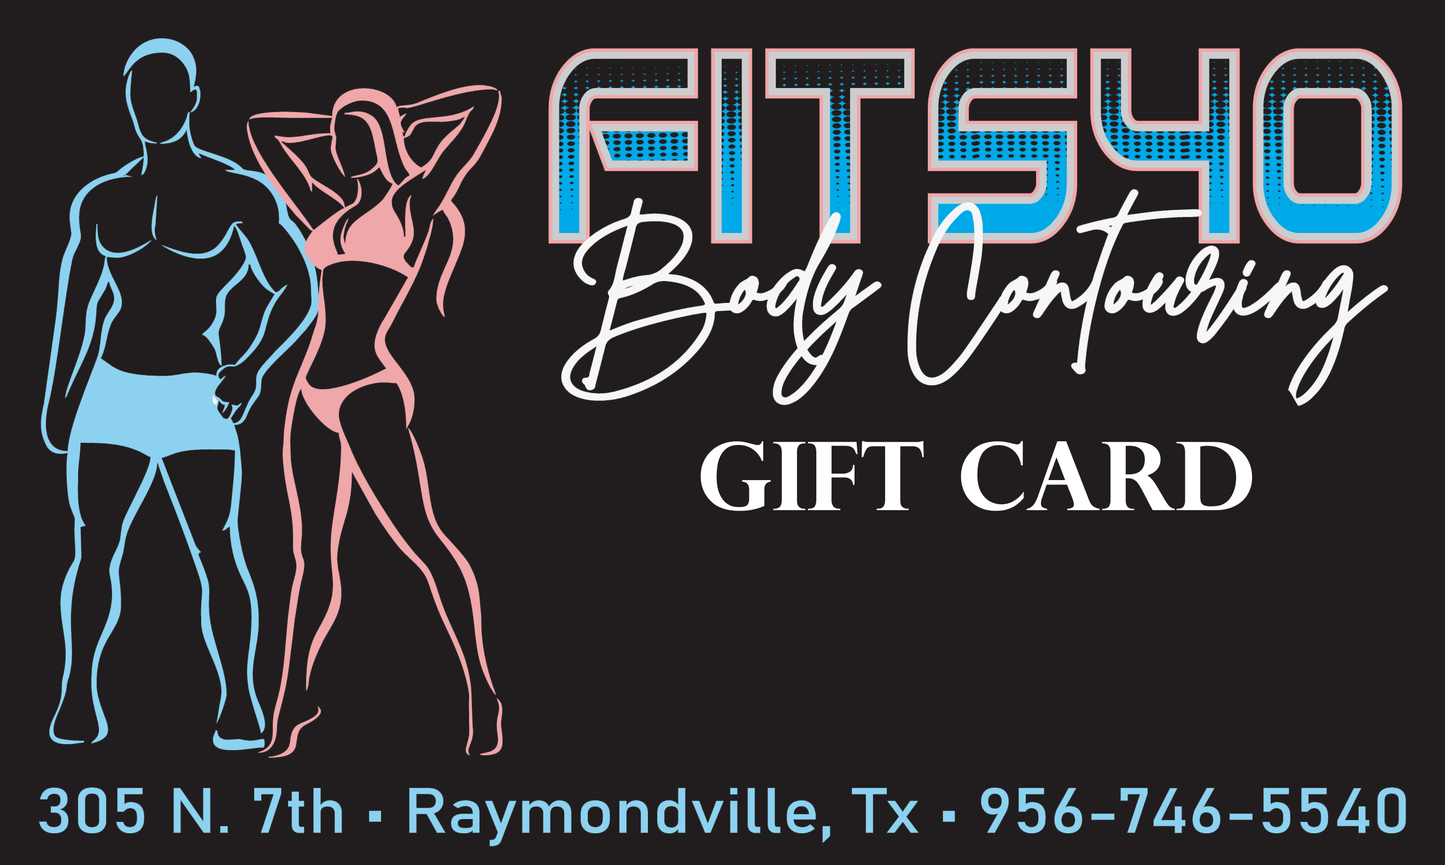 FIT540 BODY CONTOURING GIFT CARD